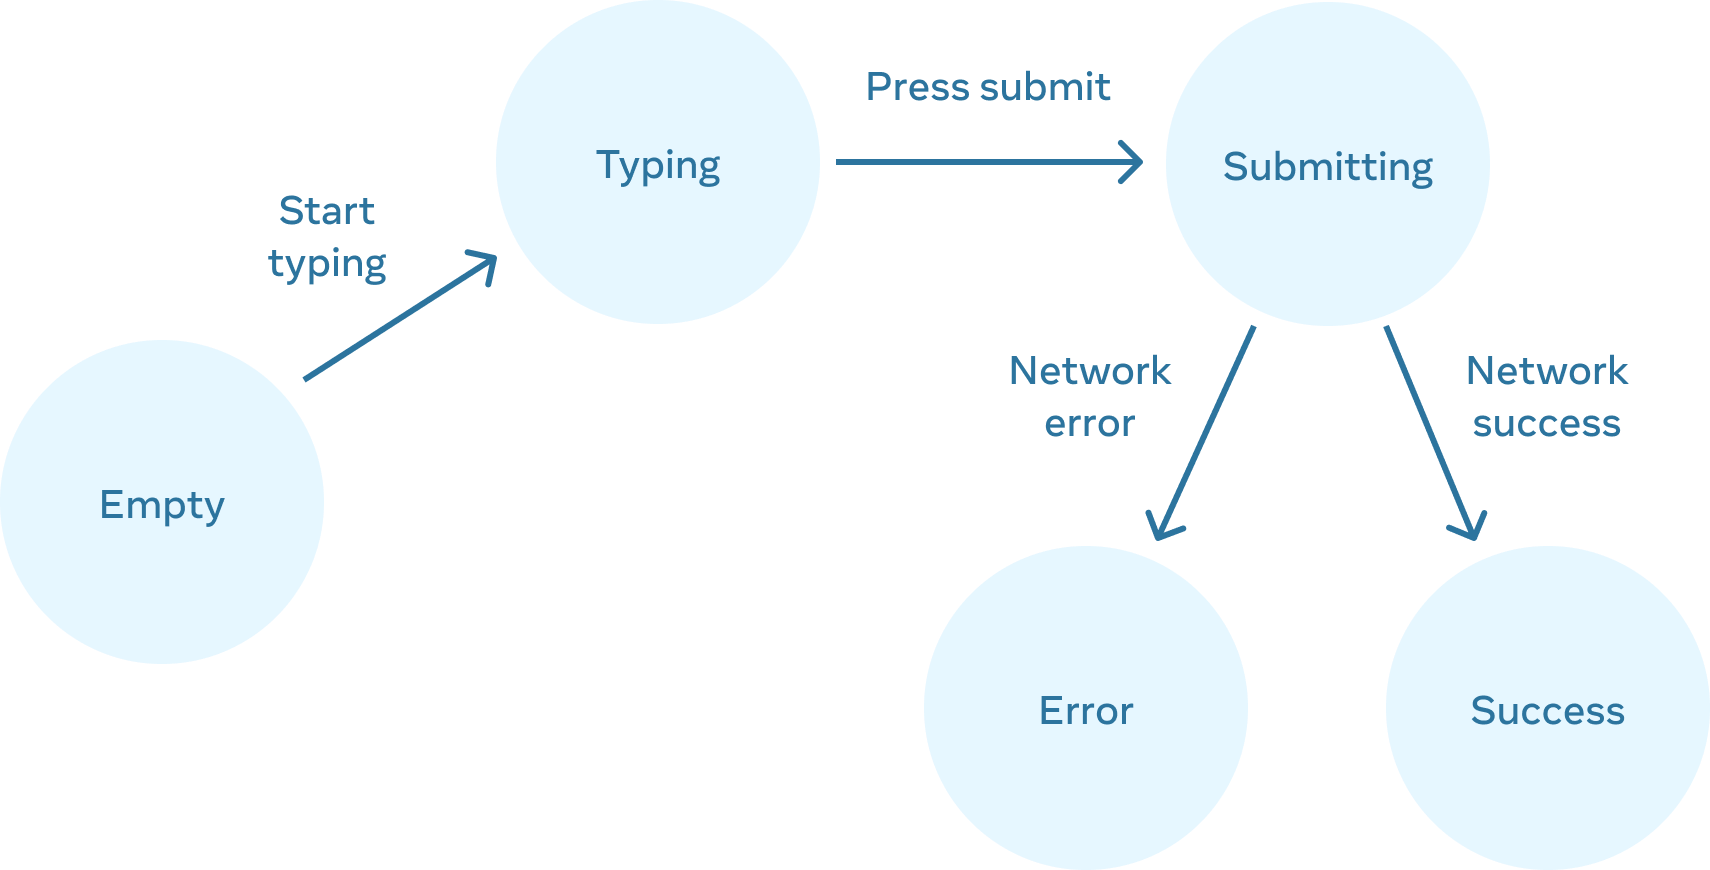 Flow chart moving left to right with 5 nodes. The first node labeled 'empty' has one edge labeled 'start typing' connected to a node labeled 'typing'. That node has one edge labeled 'press submit' connected to a node labeled 'submitting', which has two edges. The left edge is labeled 'network error' connecting to a node labeled 'error'. The right edge is labeled 'network success' connecting to a node labeled 'success'.